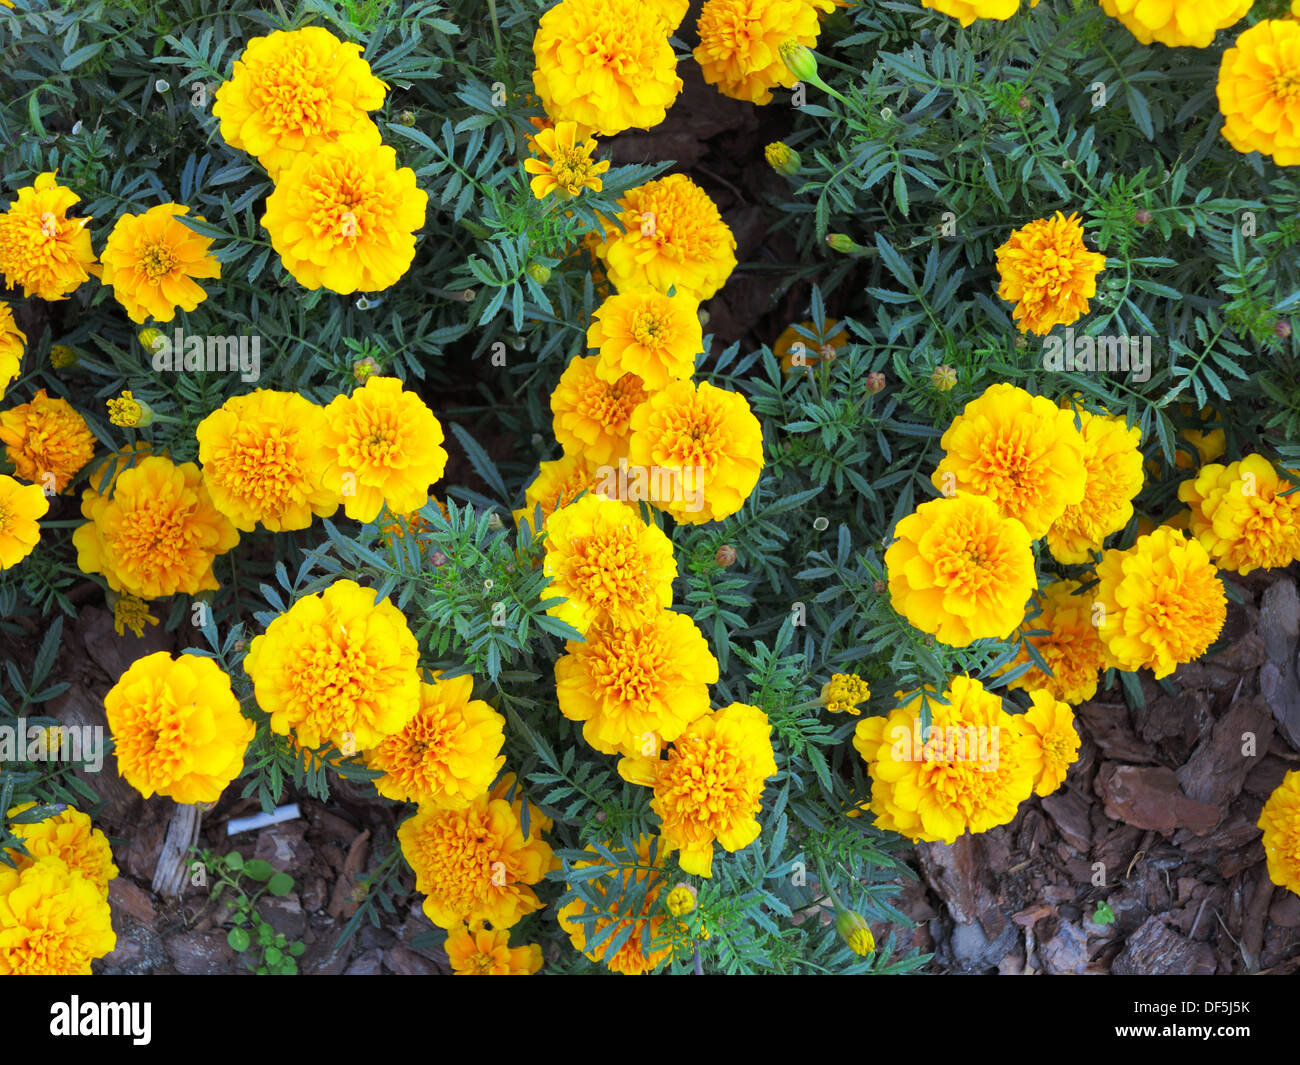 Yellow aster flowers in the garden as background. Marigold - Tagetes erecta L. Stock Photo